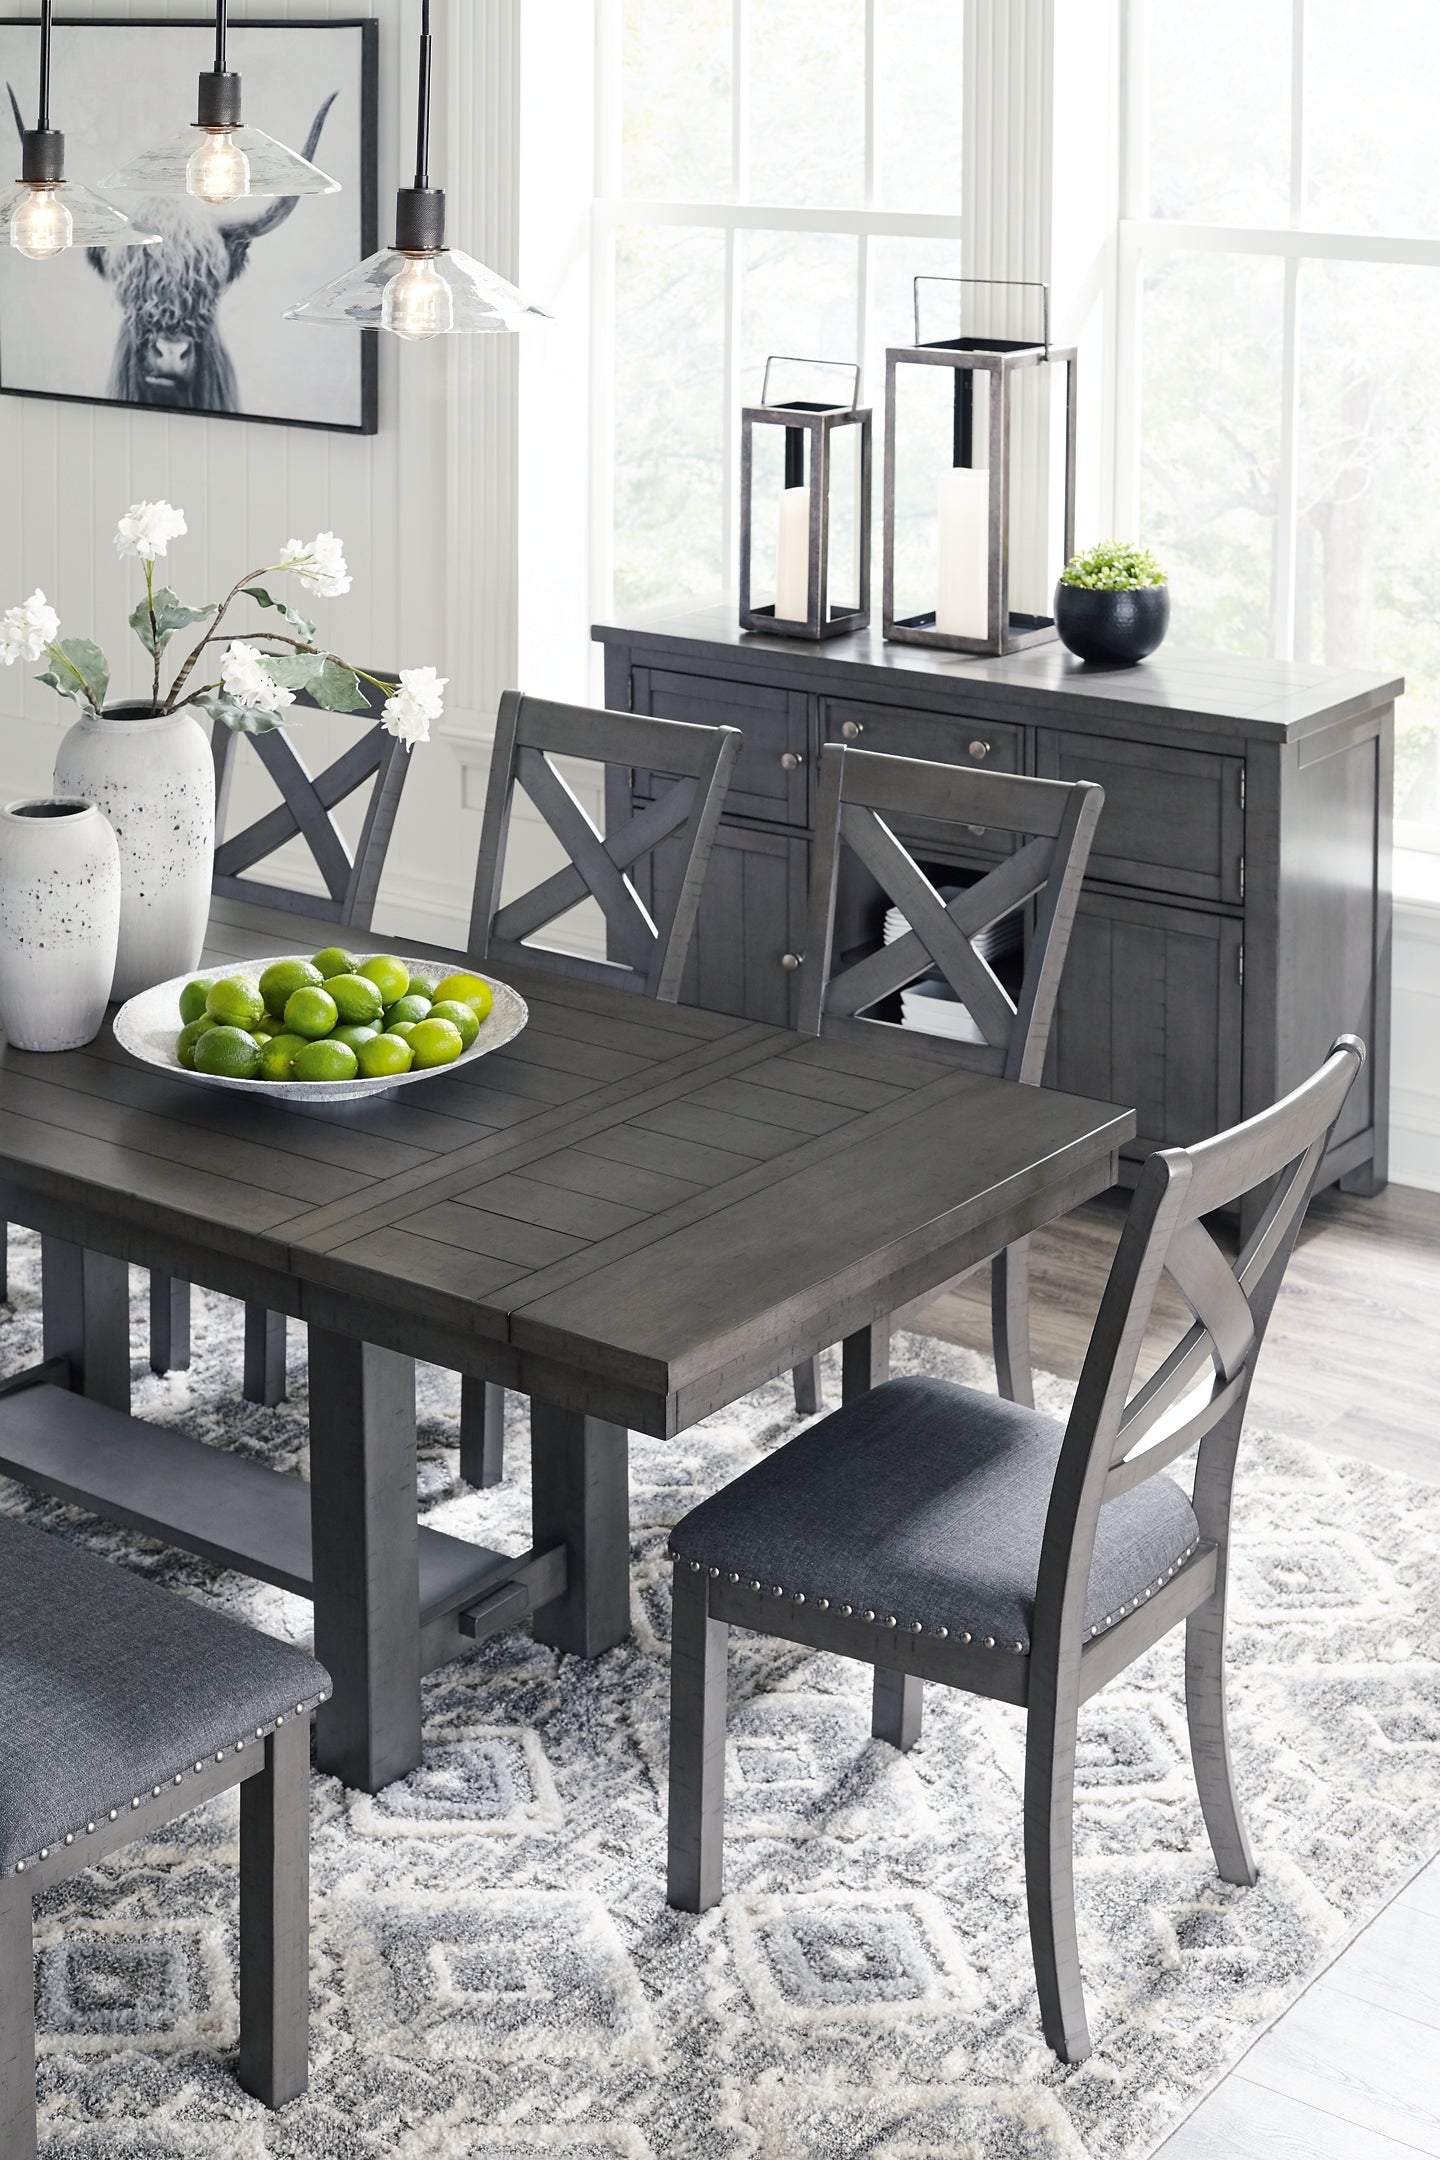 Myshanna Dining Table and 8 Chairs with Storage